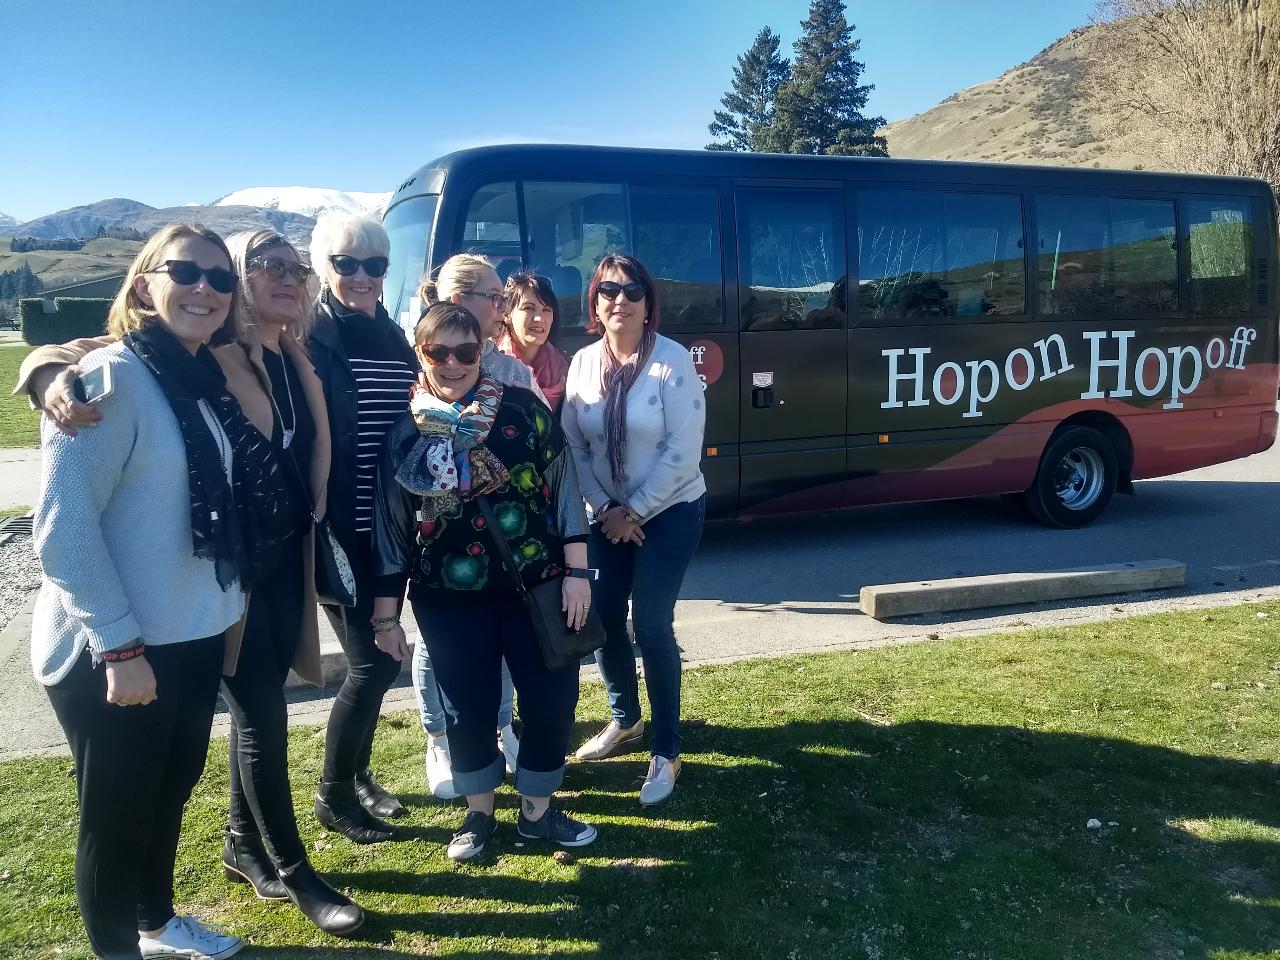 Hop on Hop off Tours - Full Day (Departing Picton i-SITE)